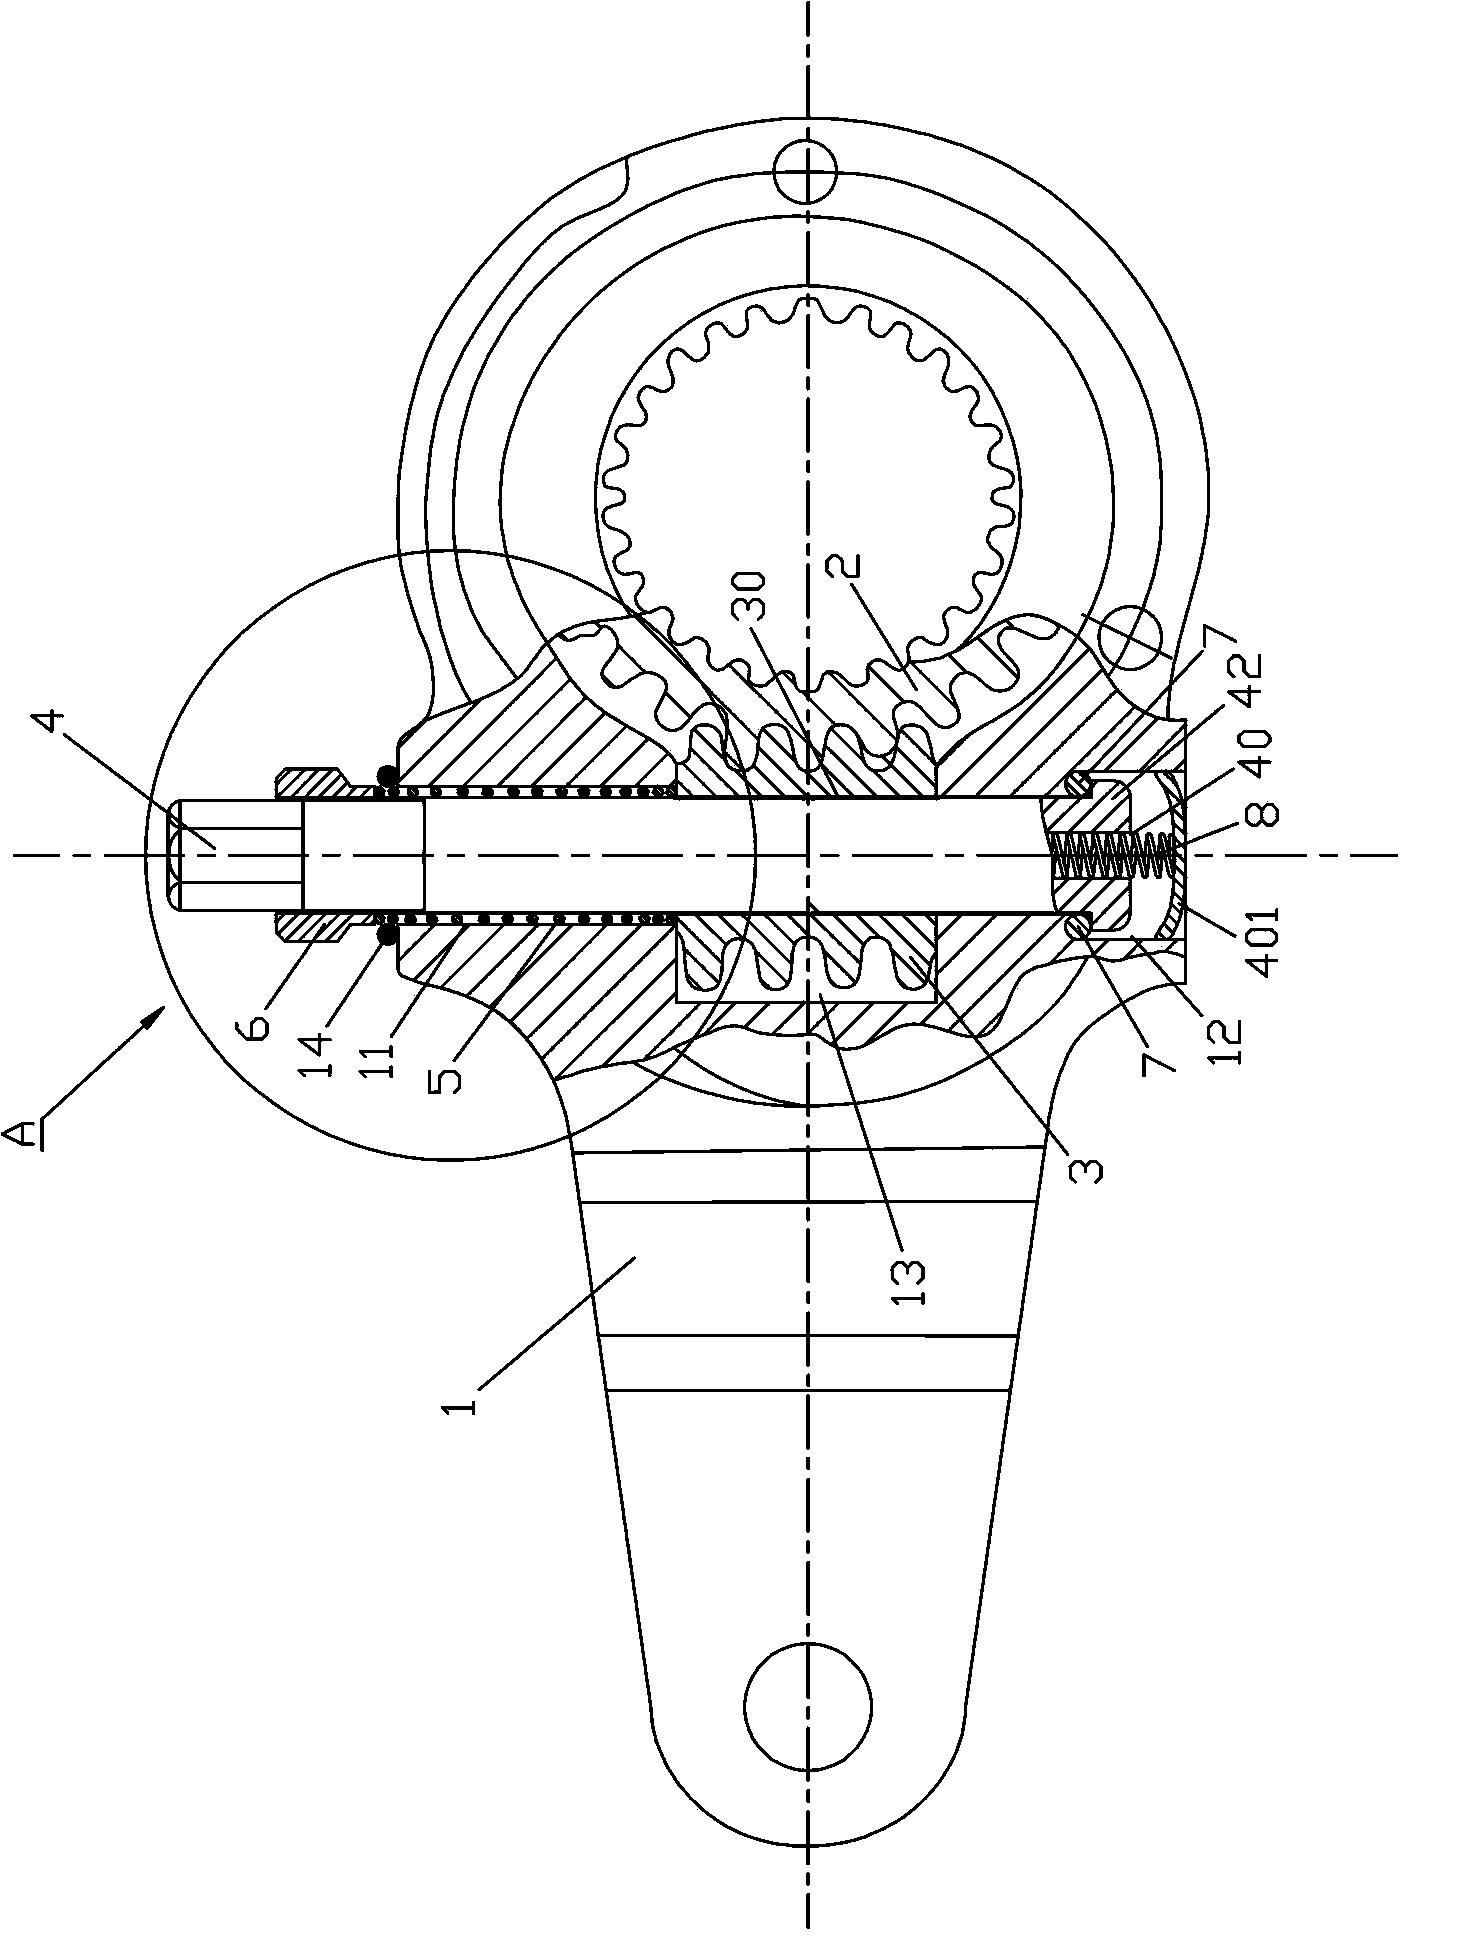 Hand-operated adjusting arm capable of completely locking adjusting shaft and worm